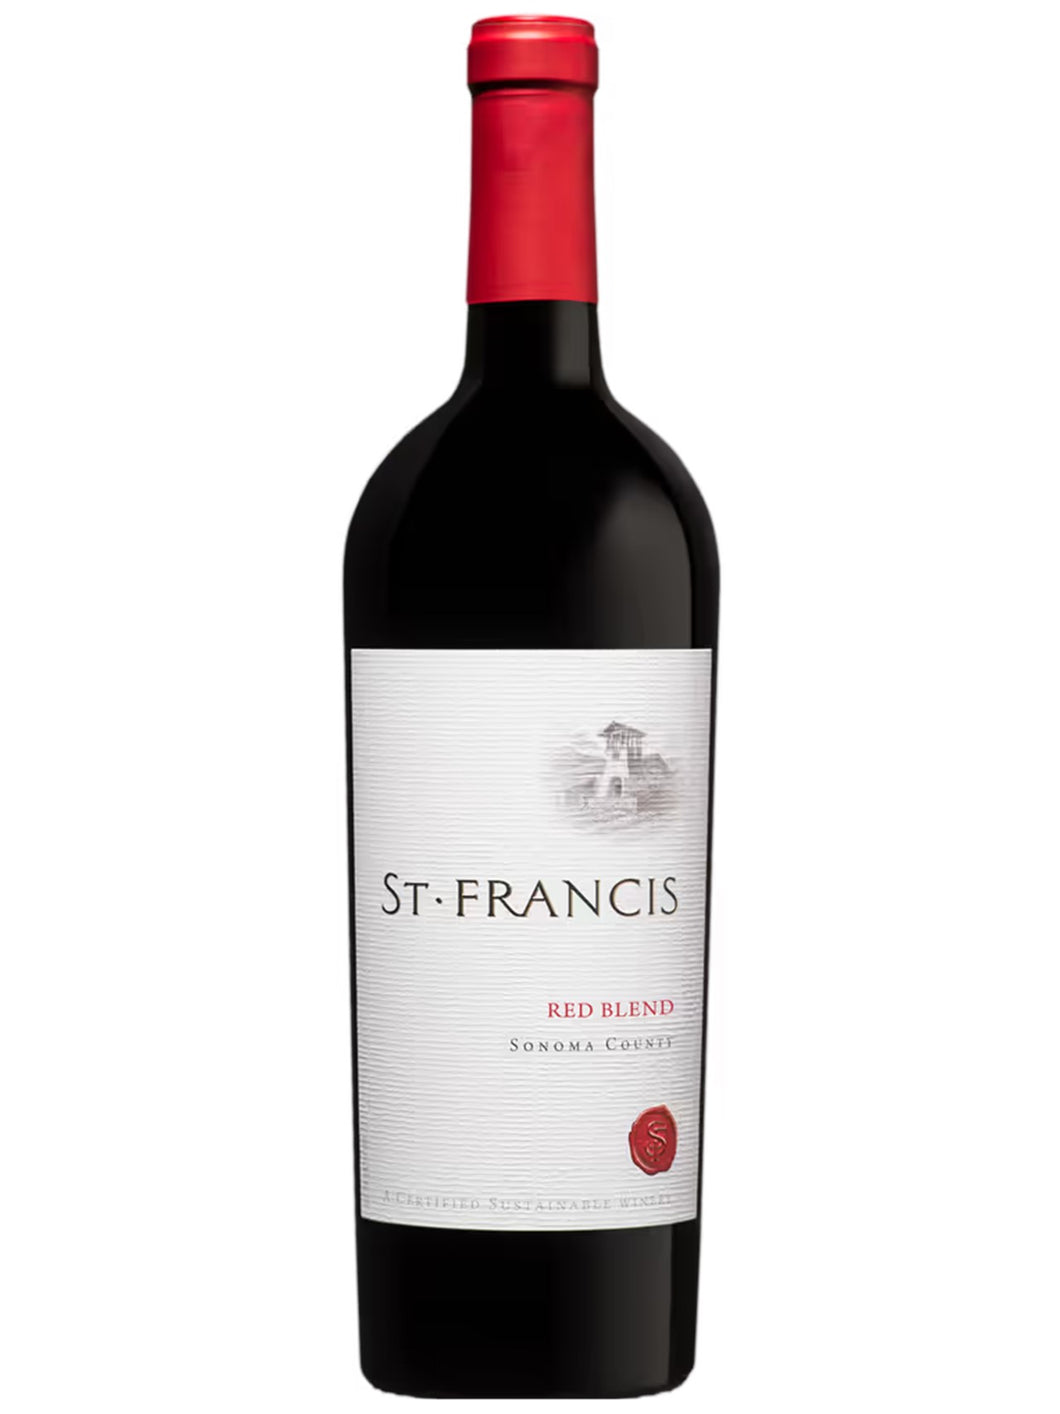 St. Francis Red Blend Sonoma County